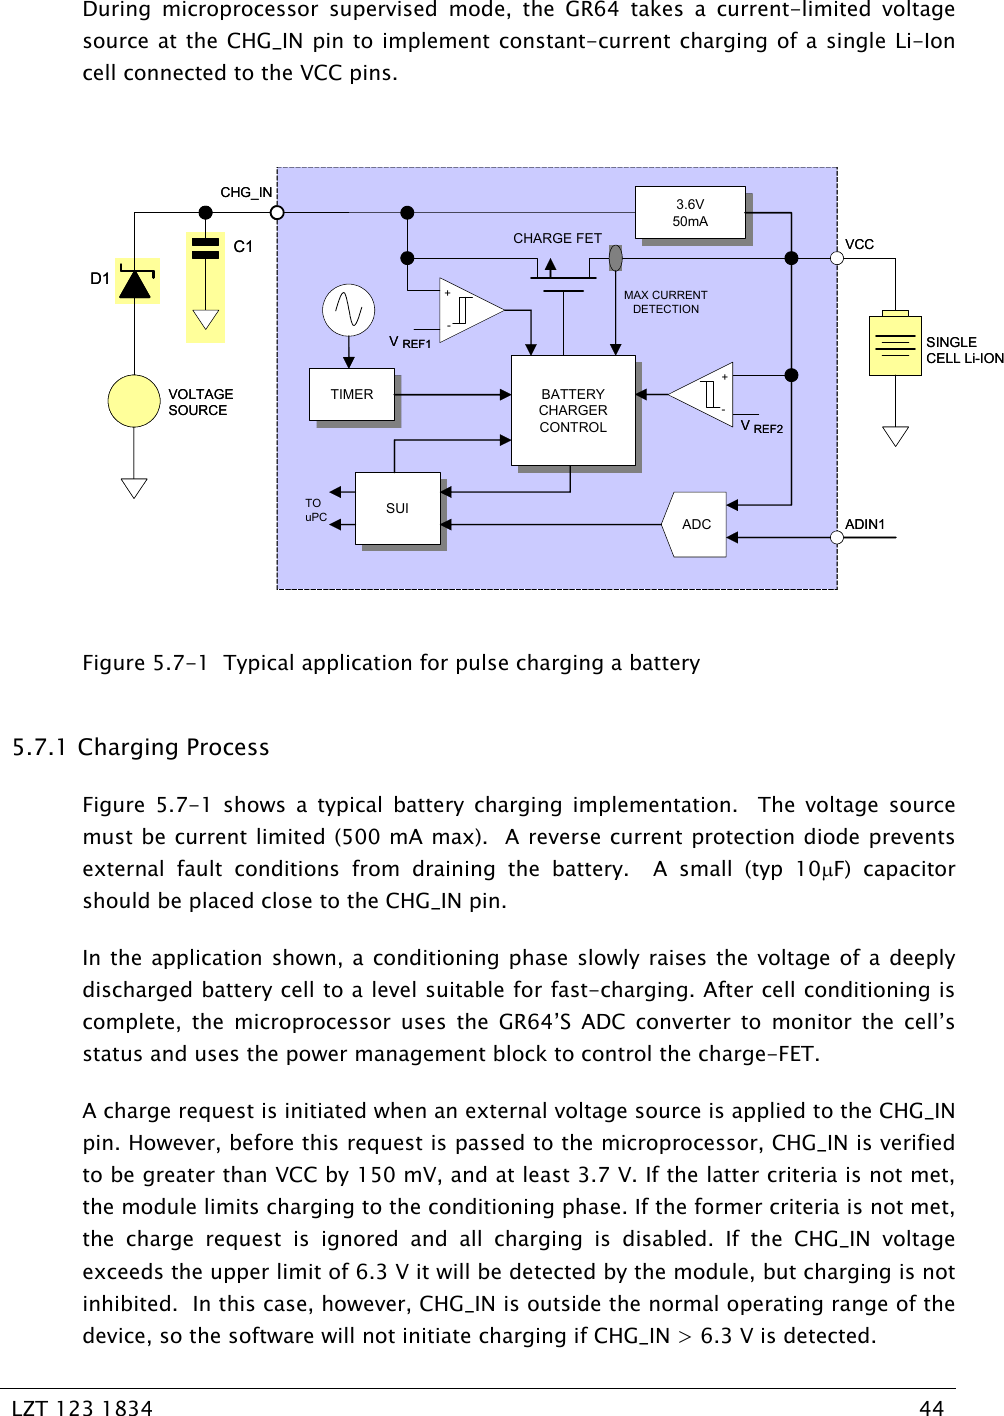   LZT 123 1834  44   During microprocessor supervised mode, the GR64 takes a current-limited voltage source at the CHG_IN pin to implement constant-current charging of a single Li-Ion cell connected to the VCC pins.  BATTERYCHARGERCONTROLBATTERYCHARGERCONTROLTIMERTIMER+-3.6V50mA3.6V50mAMAX CURRENTDETECTIONADCSUISUITOuPCVREF1ADIN1C1VREF2VCCSINGLECELL Li-IONVOLTAGESOURCECHG_IND1CHARGE FET+-BATTERYCHARGERCONTROLBATTERYCHARGERCONTROLTIMERTIMER+-3.6V50mA3.6V50mAMAX CURRENTDETECTIONADCSUISUITOuPCVREF1VREF1ADIN1C1VREF2VREF2VCCSINGLECELL Li-IONVOLTAGESOURCECHG_IND1CHARGE FET+-Figure 5.7-1  Typical application for pulse charging a battery 5.7.1  Charging Process Figure 5.7-1 shows a typical battery charging implementation.  The voltage source must be current limited (500 mA max).  A reverse current protection diode prevents external fault conditions from draining the battery.  A small (typ 10µF) capacitor should be placed close to the CHG_IN pin. In the application shown, a conditioning phase slowly raises the voltage of a deeply discharged battery cell to a level suitable for fast-charging. After cell conditioning is complete, the microprocessor uses the GR64’S ADC converter to monitor the cell’s status and uses the power management block to control the charge-FET.   A charge request is initiated when an external voltage source is applied to the CHG_IN pin. However, before this request is passed to the microprocessor, CHG_IN is verified to be greater than VCC by 150 mV, and at least 3.7 V. If the latter criteria is not met, the module limits charging to the conditioning phase. If the former criteria is not met, the charge request is ignored and all charging is disabled. If the CHG_IN voltage exceeds the upper limit of 6.3 V it will be detected by the module, but charging is not inhibited.  In this case, however, CHG_IN is outside the normal operating range of the device, so the software will not initiate charging if CHG_IN &gt; 6.3 V is detected. 